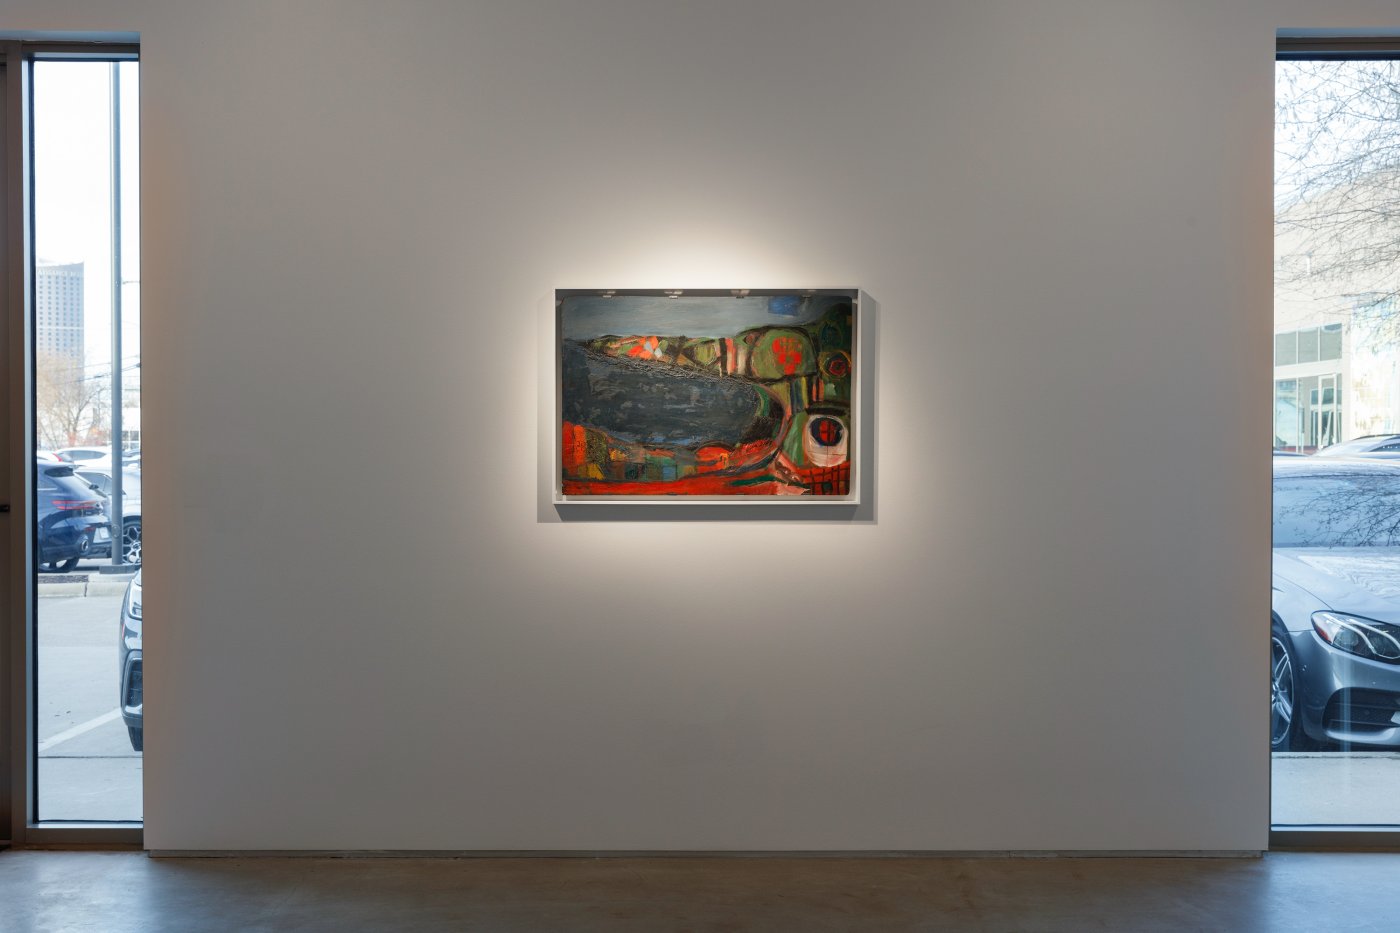 Installation image for Bas Jan Ader: Thoughts unsaid..., at Meliksetian | Briggs